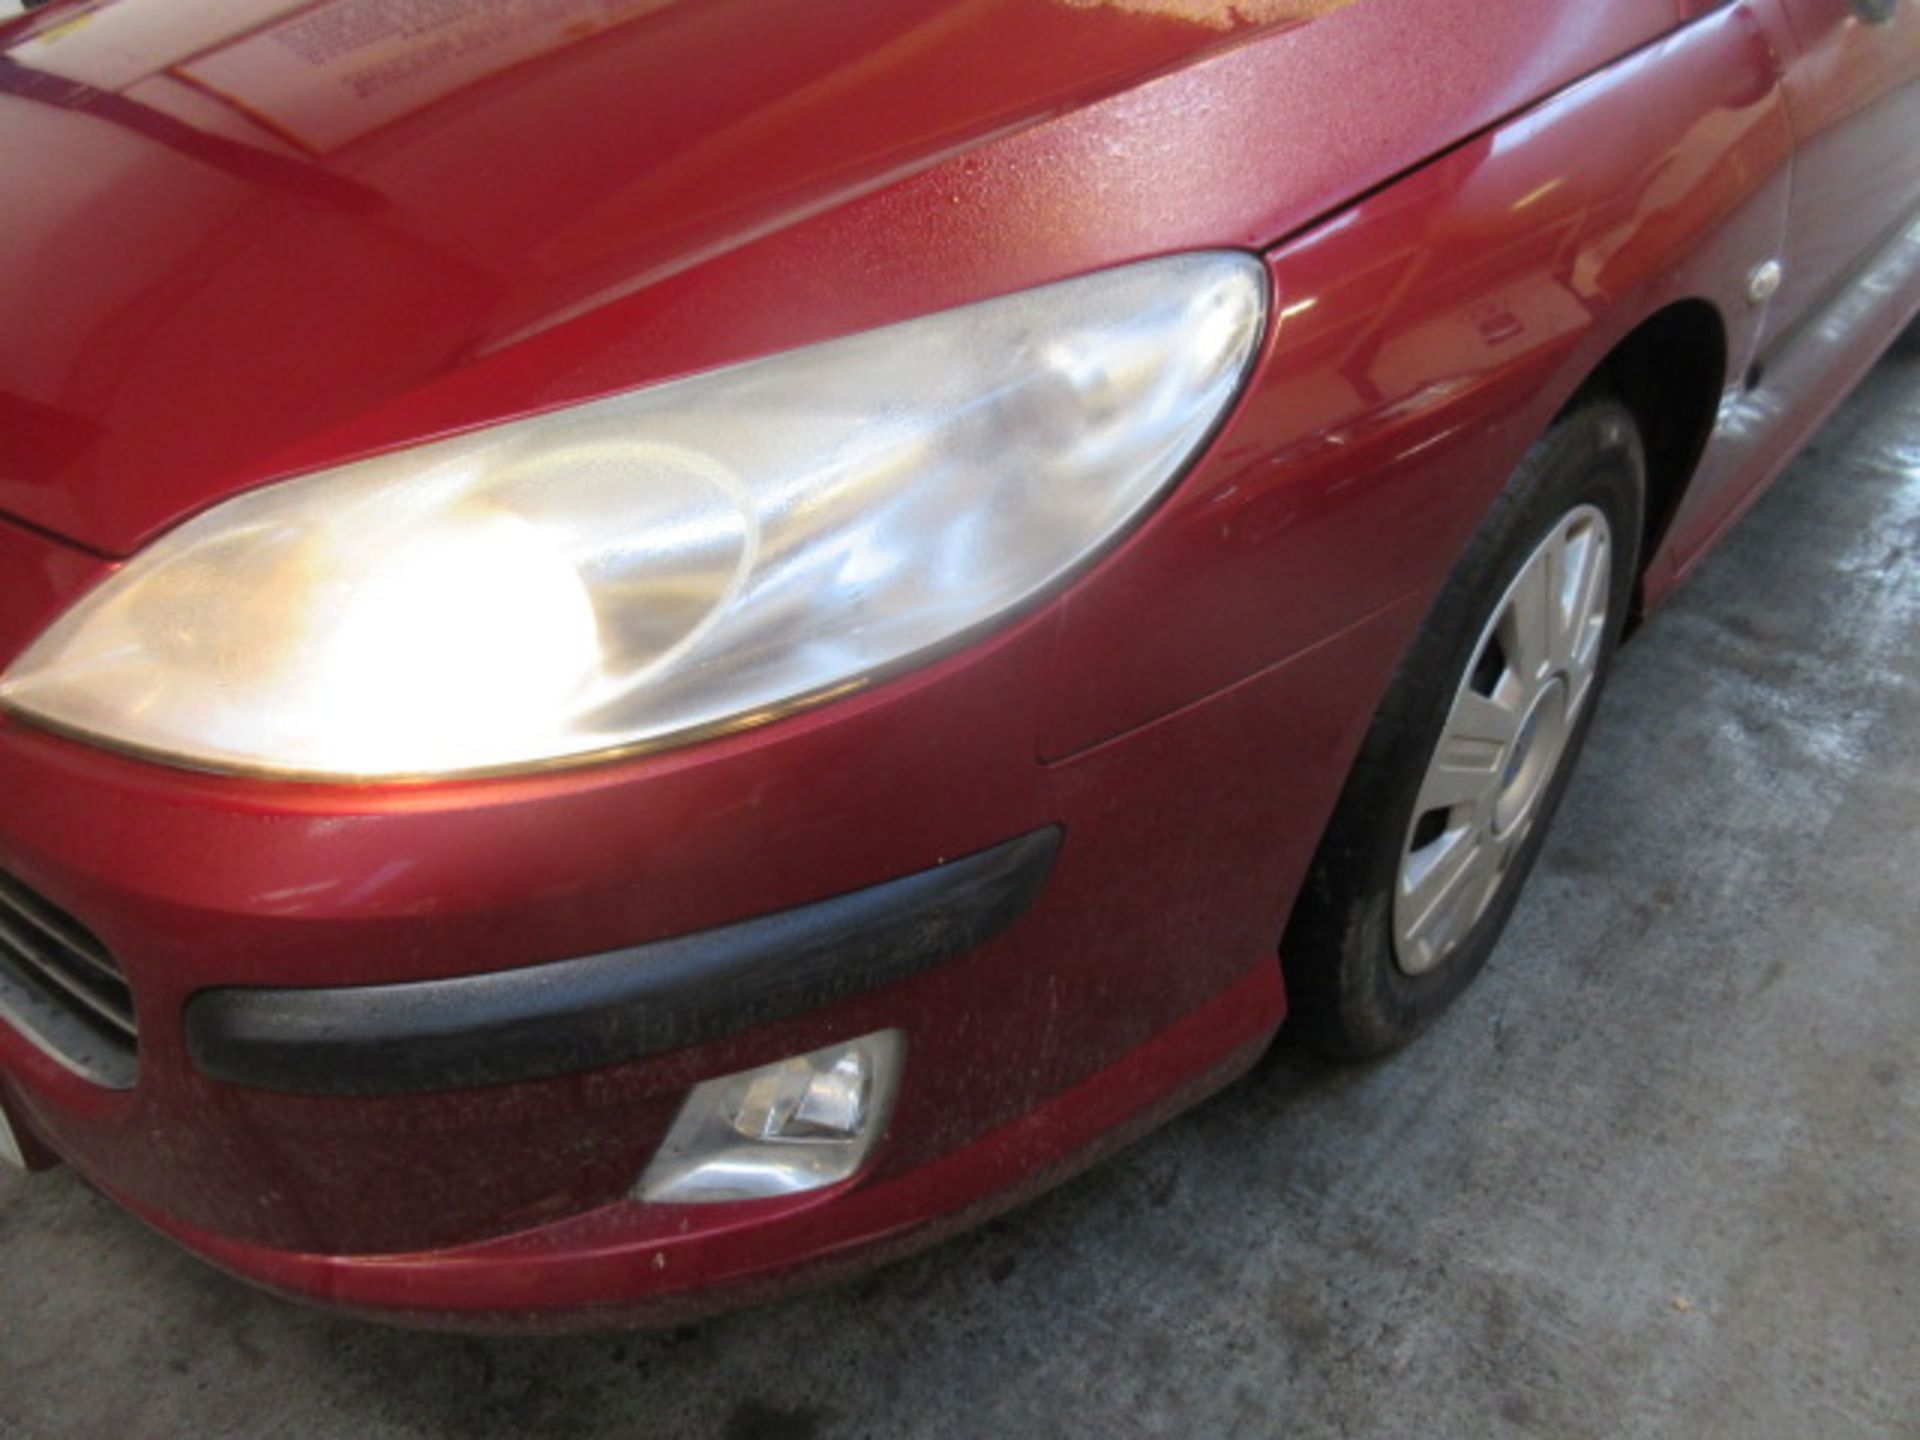 56 06 Peugeot 407 SW S HDI - Image 5 of 15